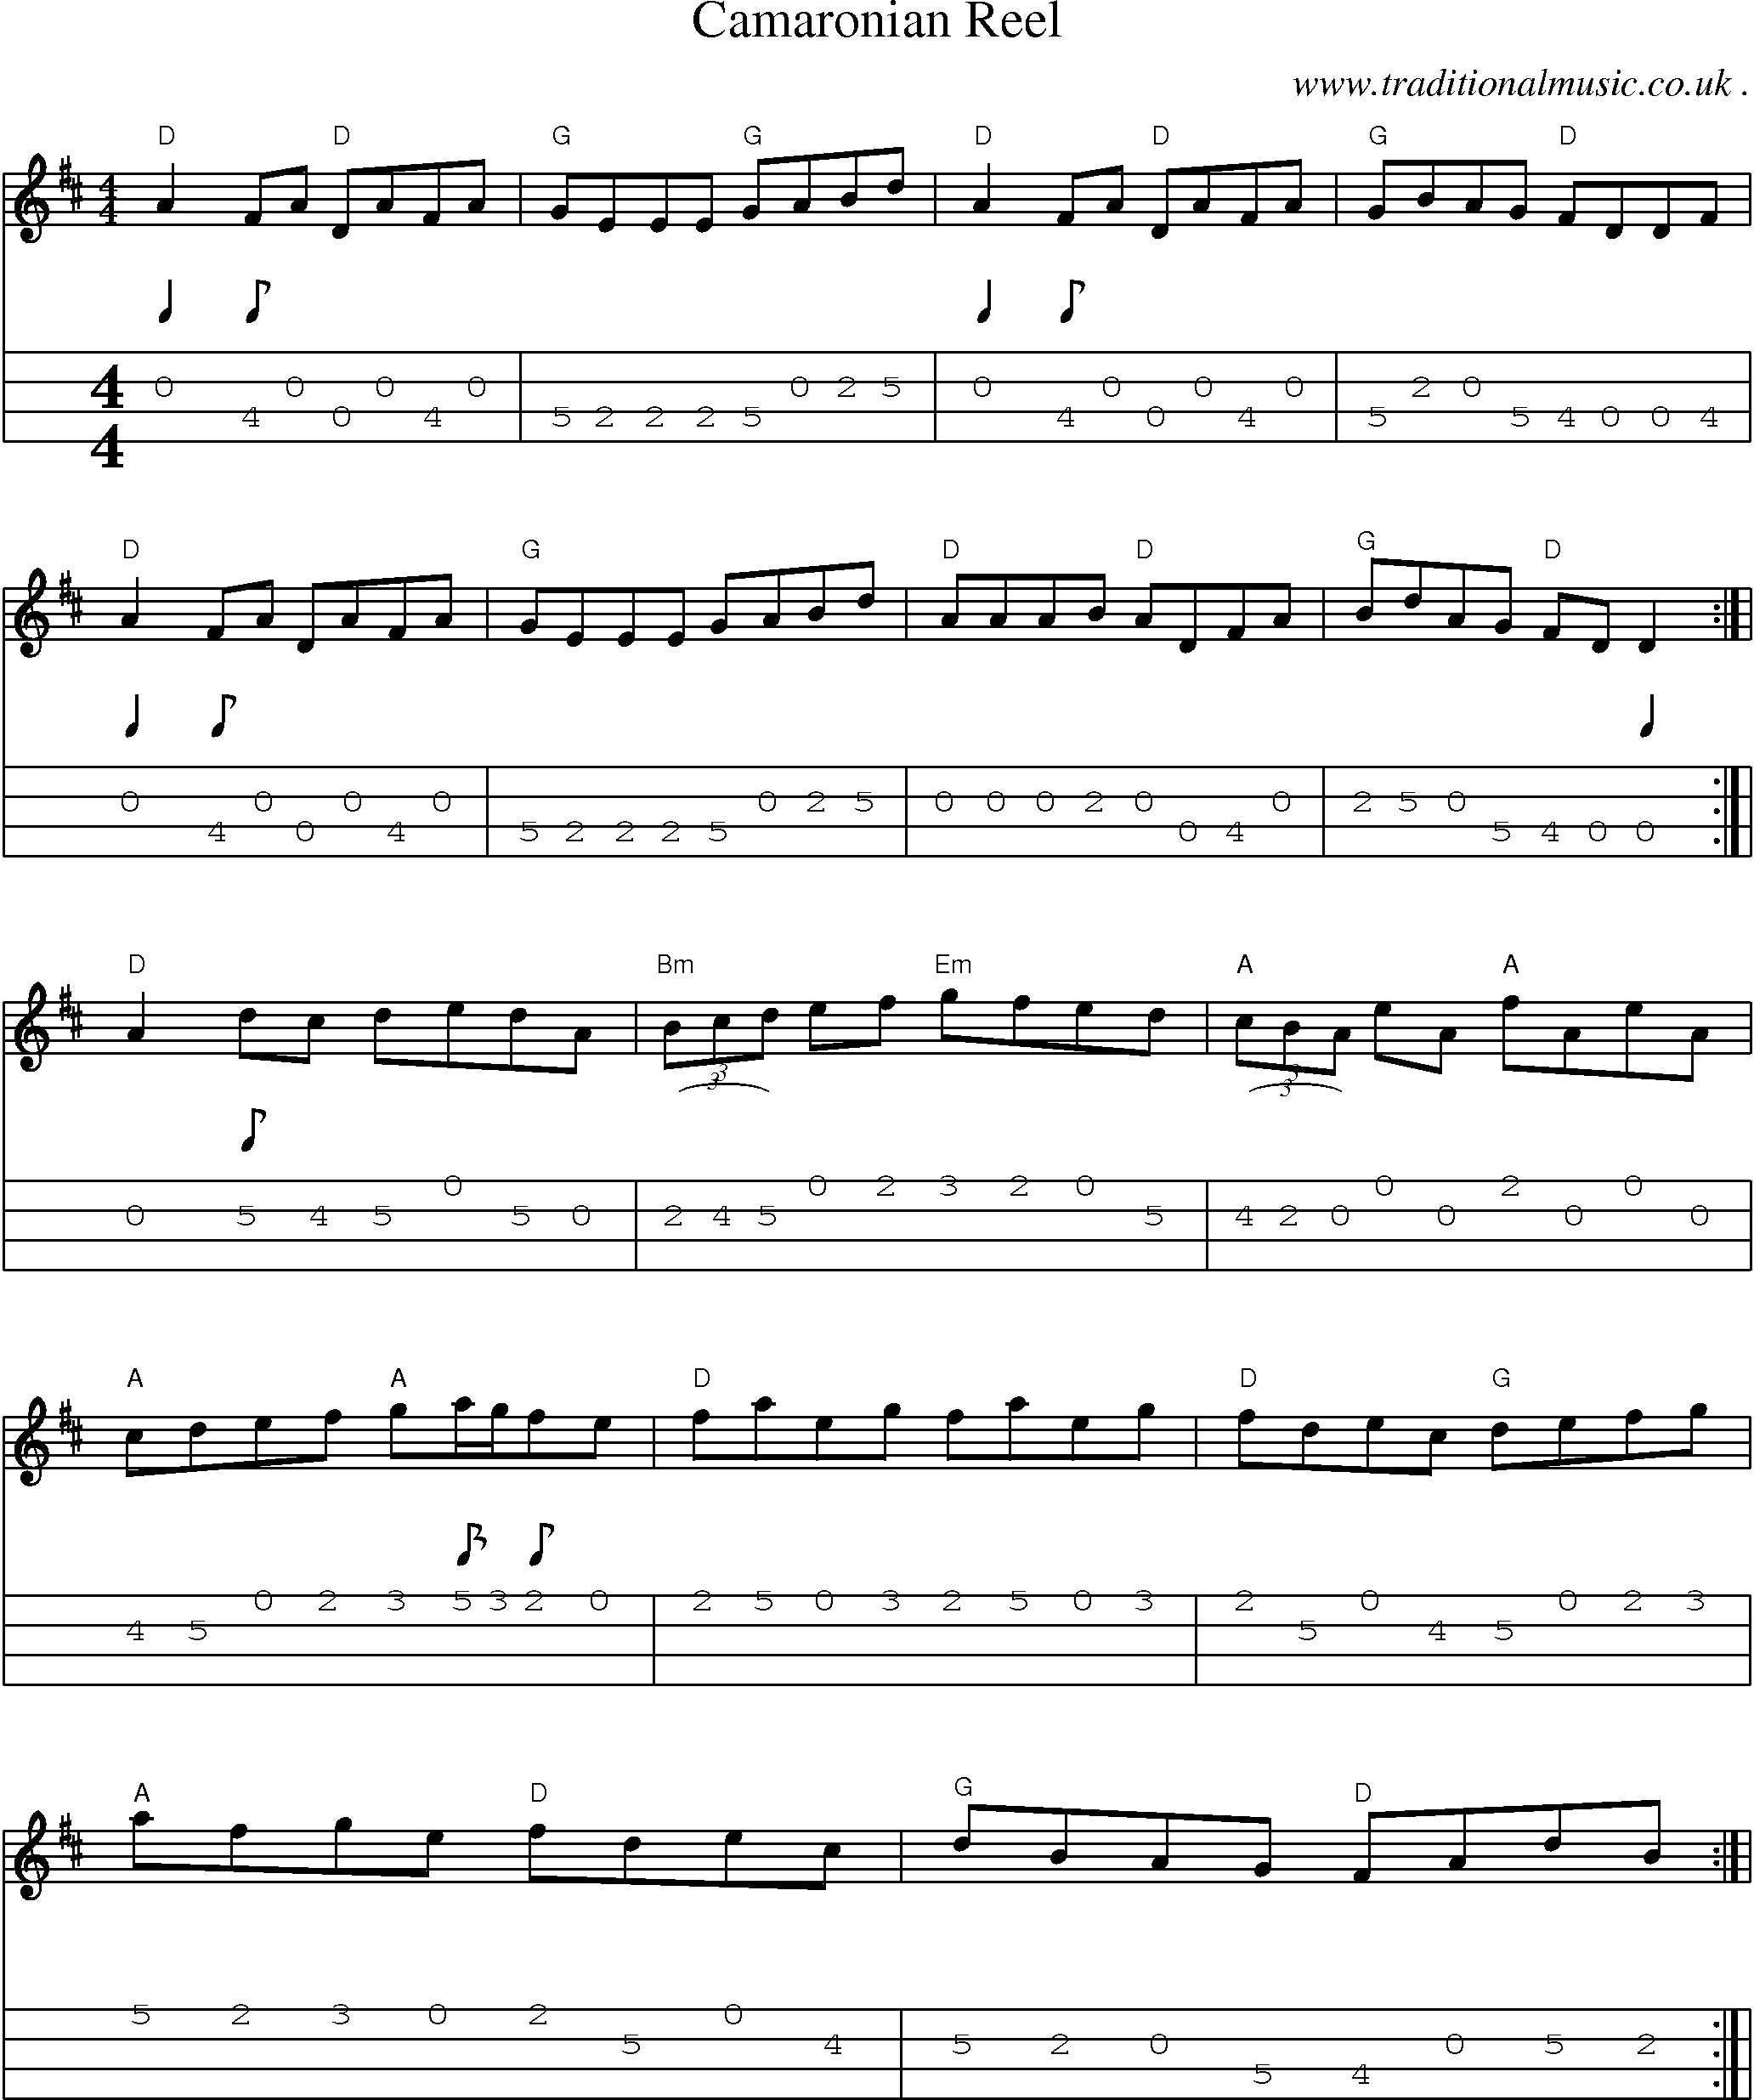 Music Score and Guitar Tabs for Camaronian Reel